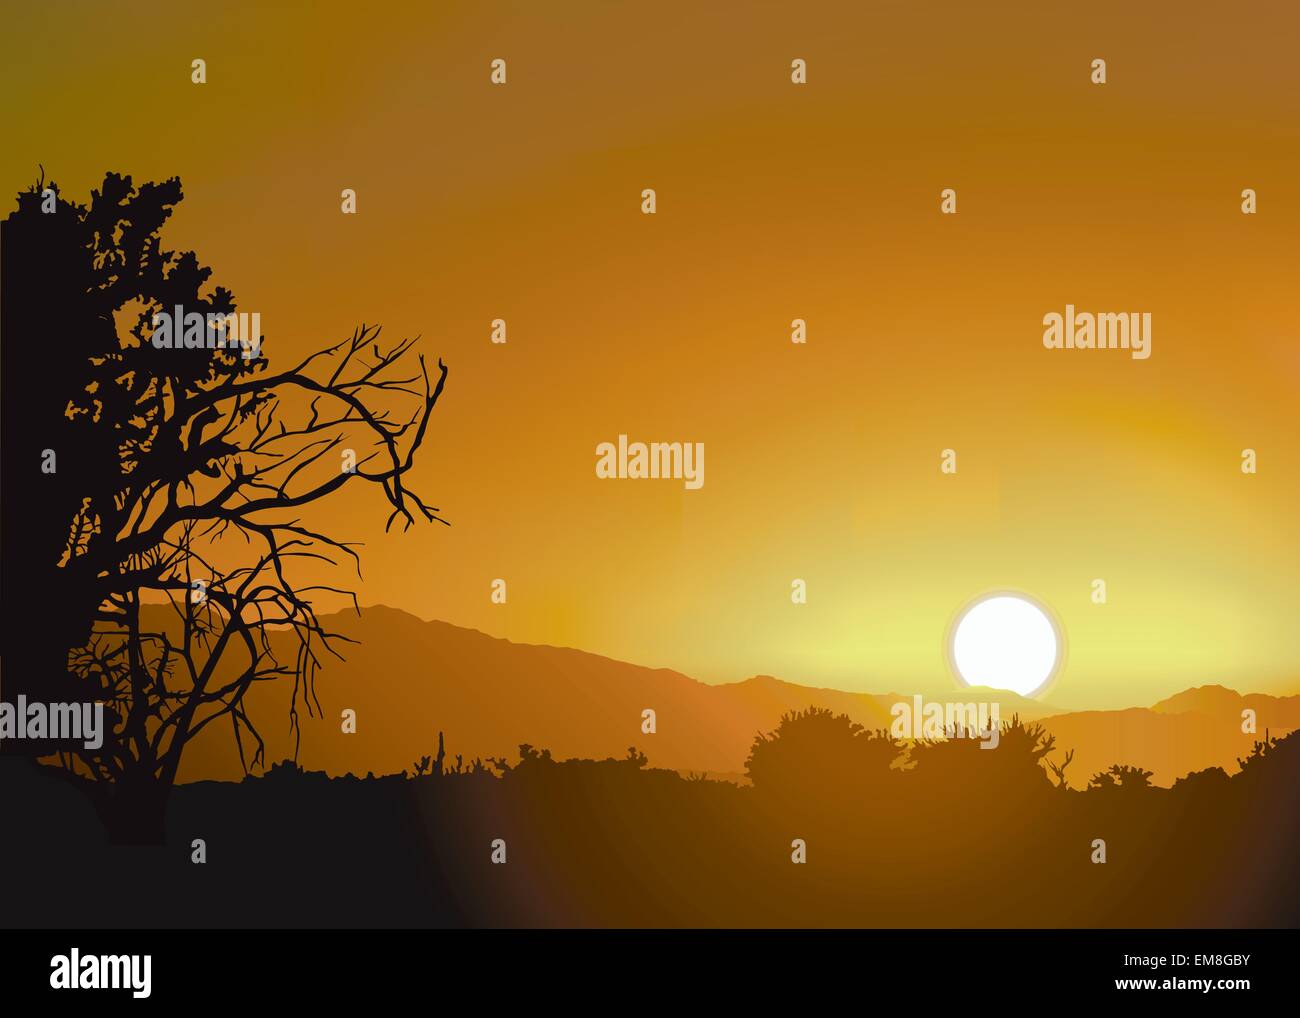 Sunset And Wilderness Stock Vector